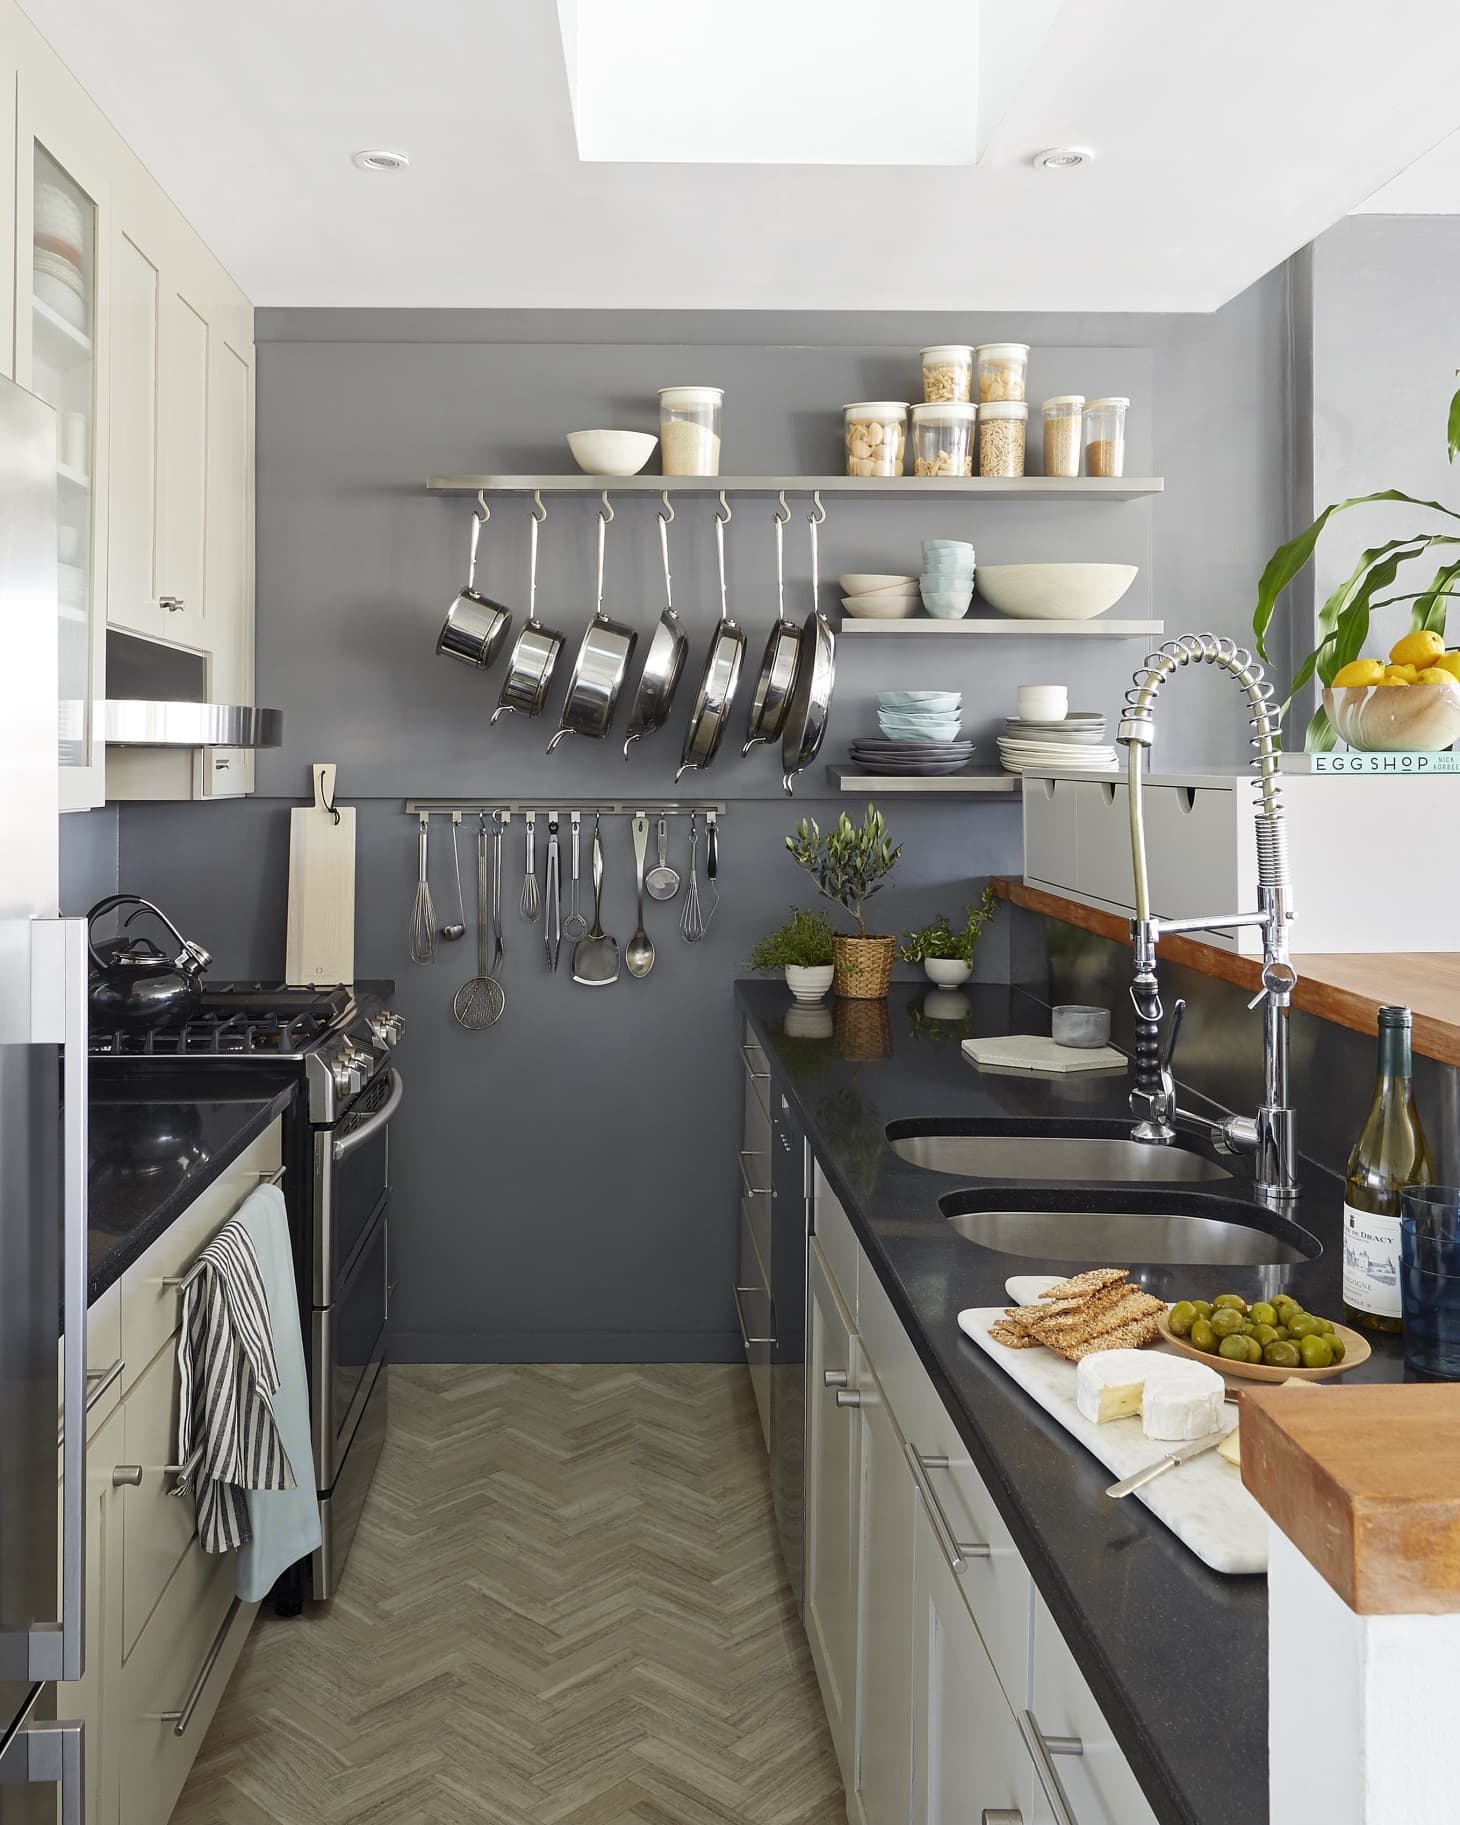 The Best Small Kitchen Must-Haves, According to Interior Designers